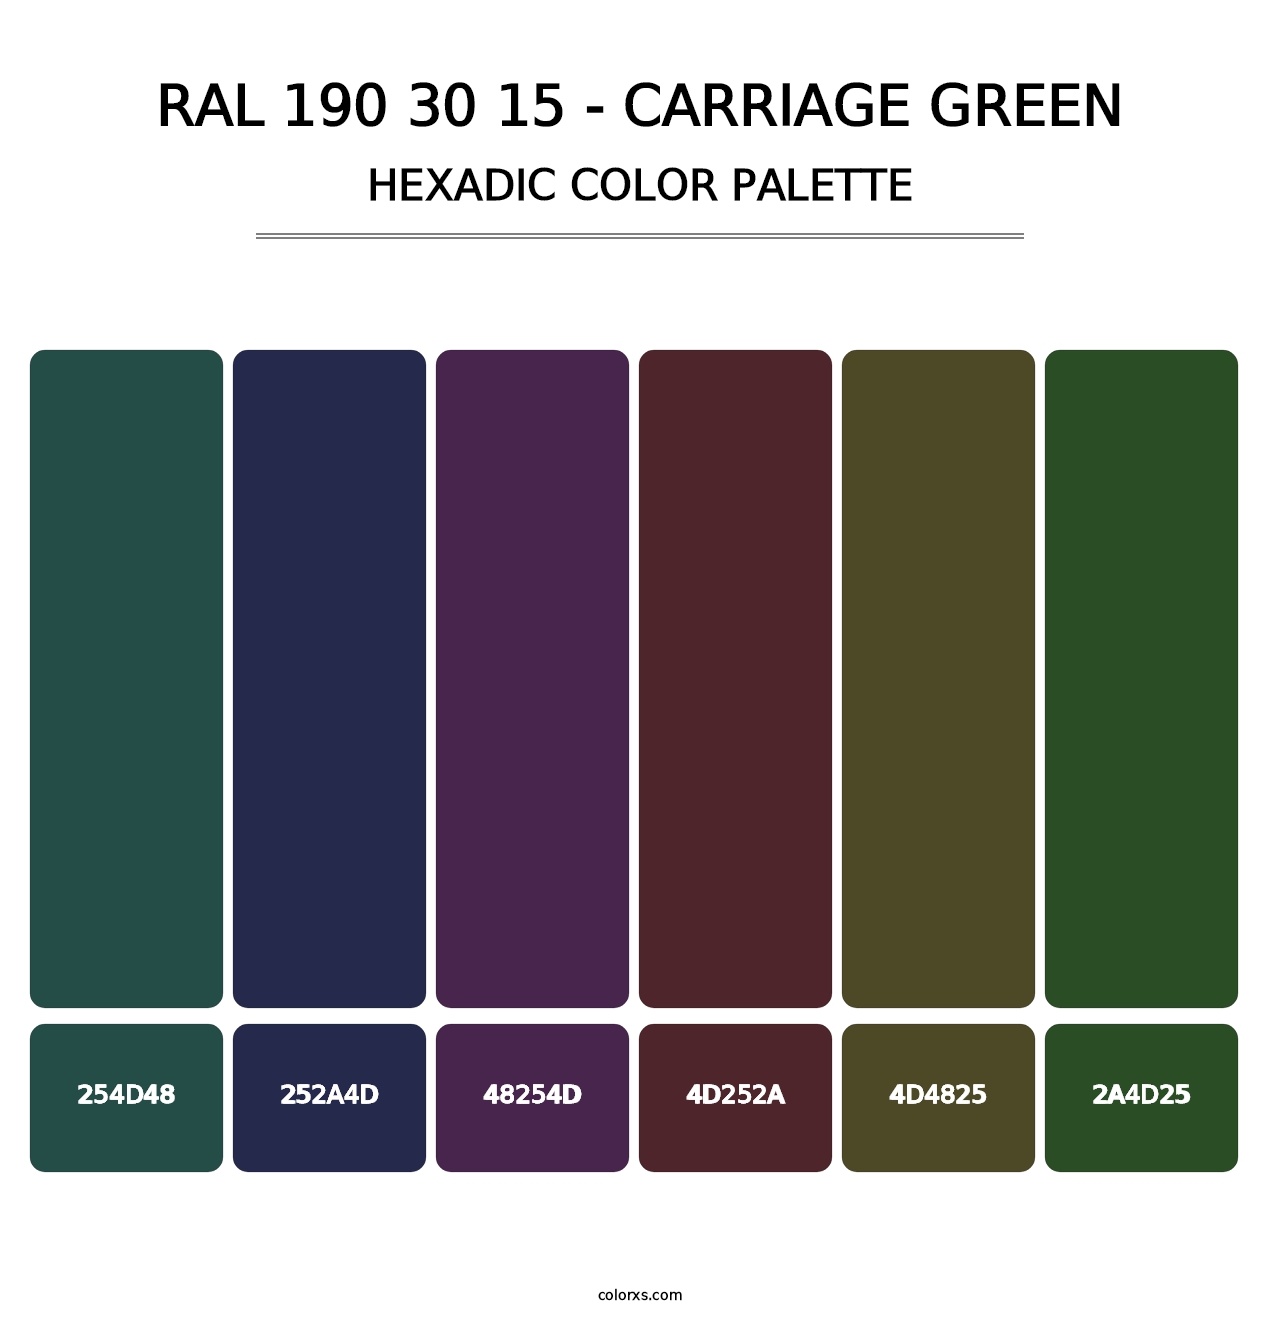 RAL 190 30 15 - Carriage Green - Hexadic Color Palette